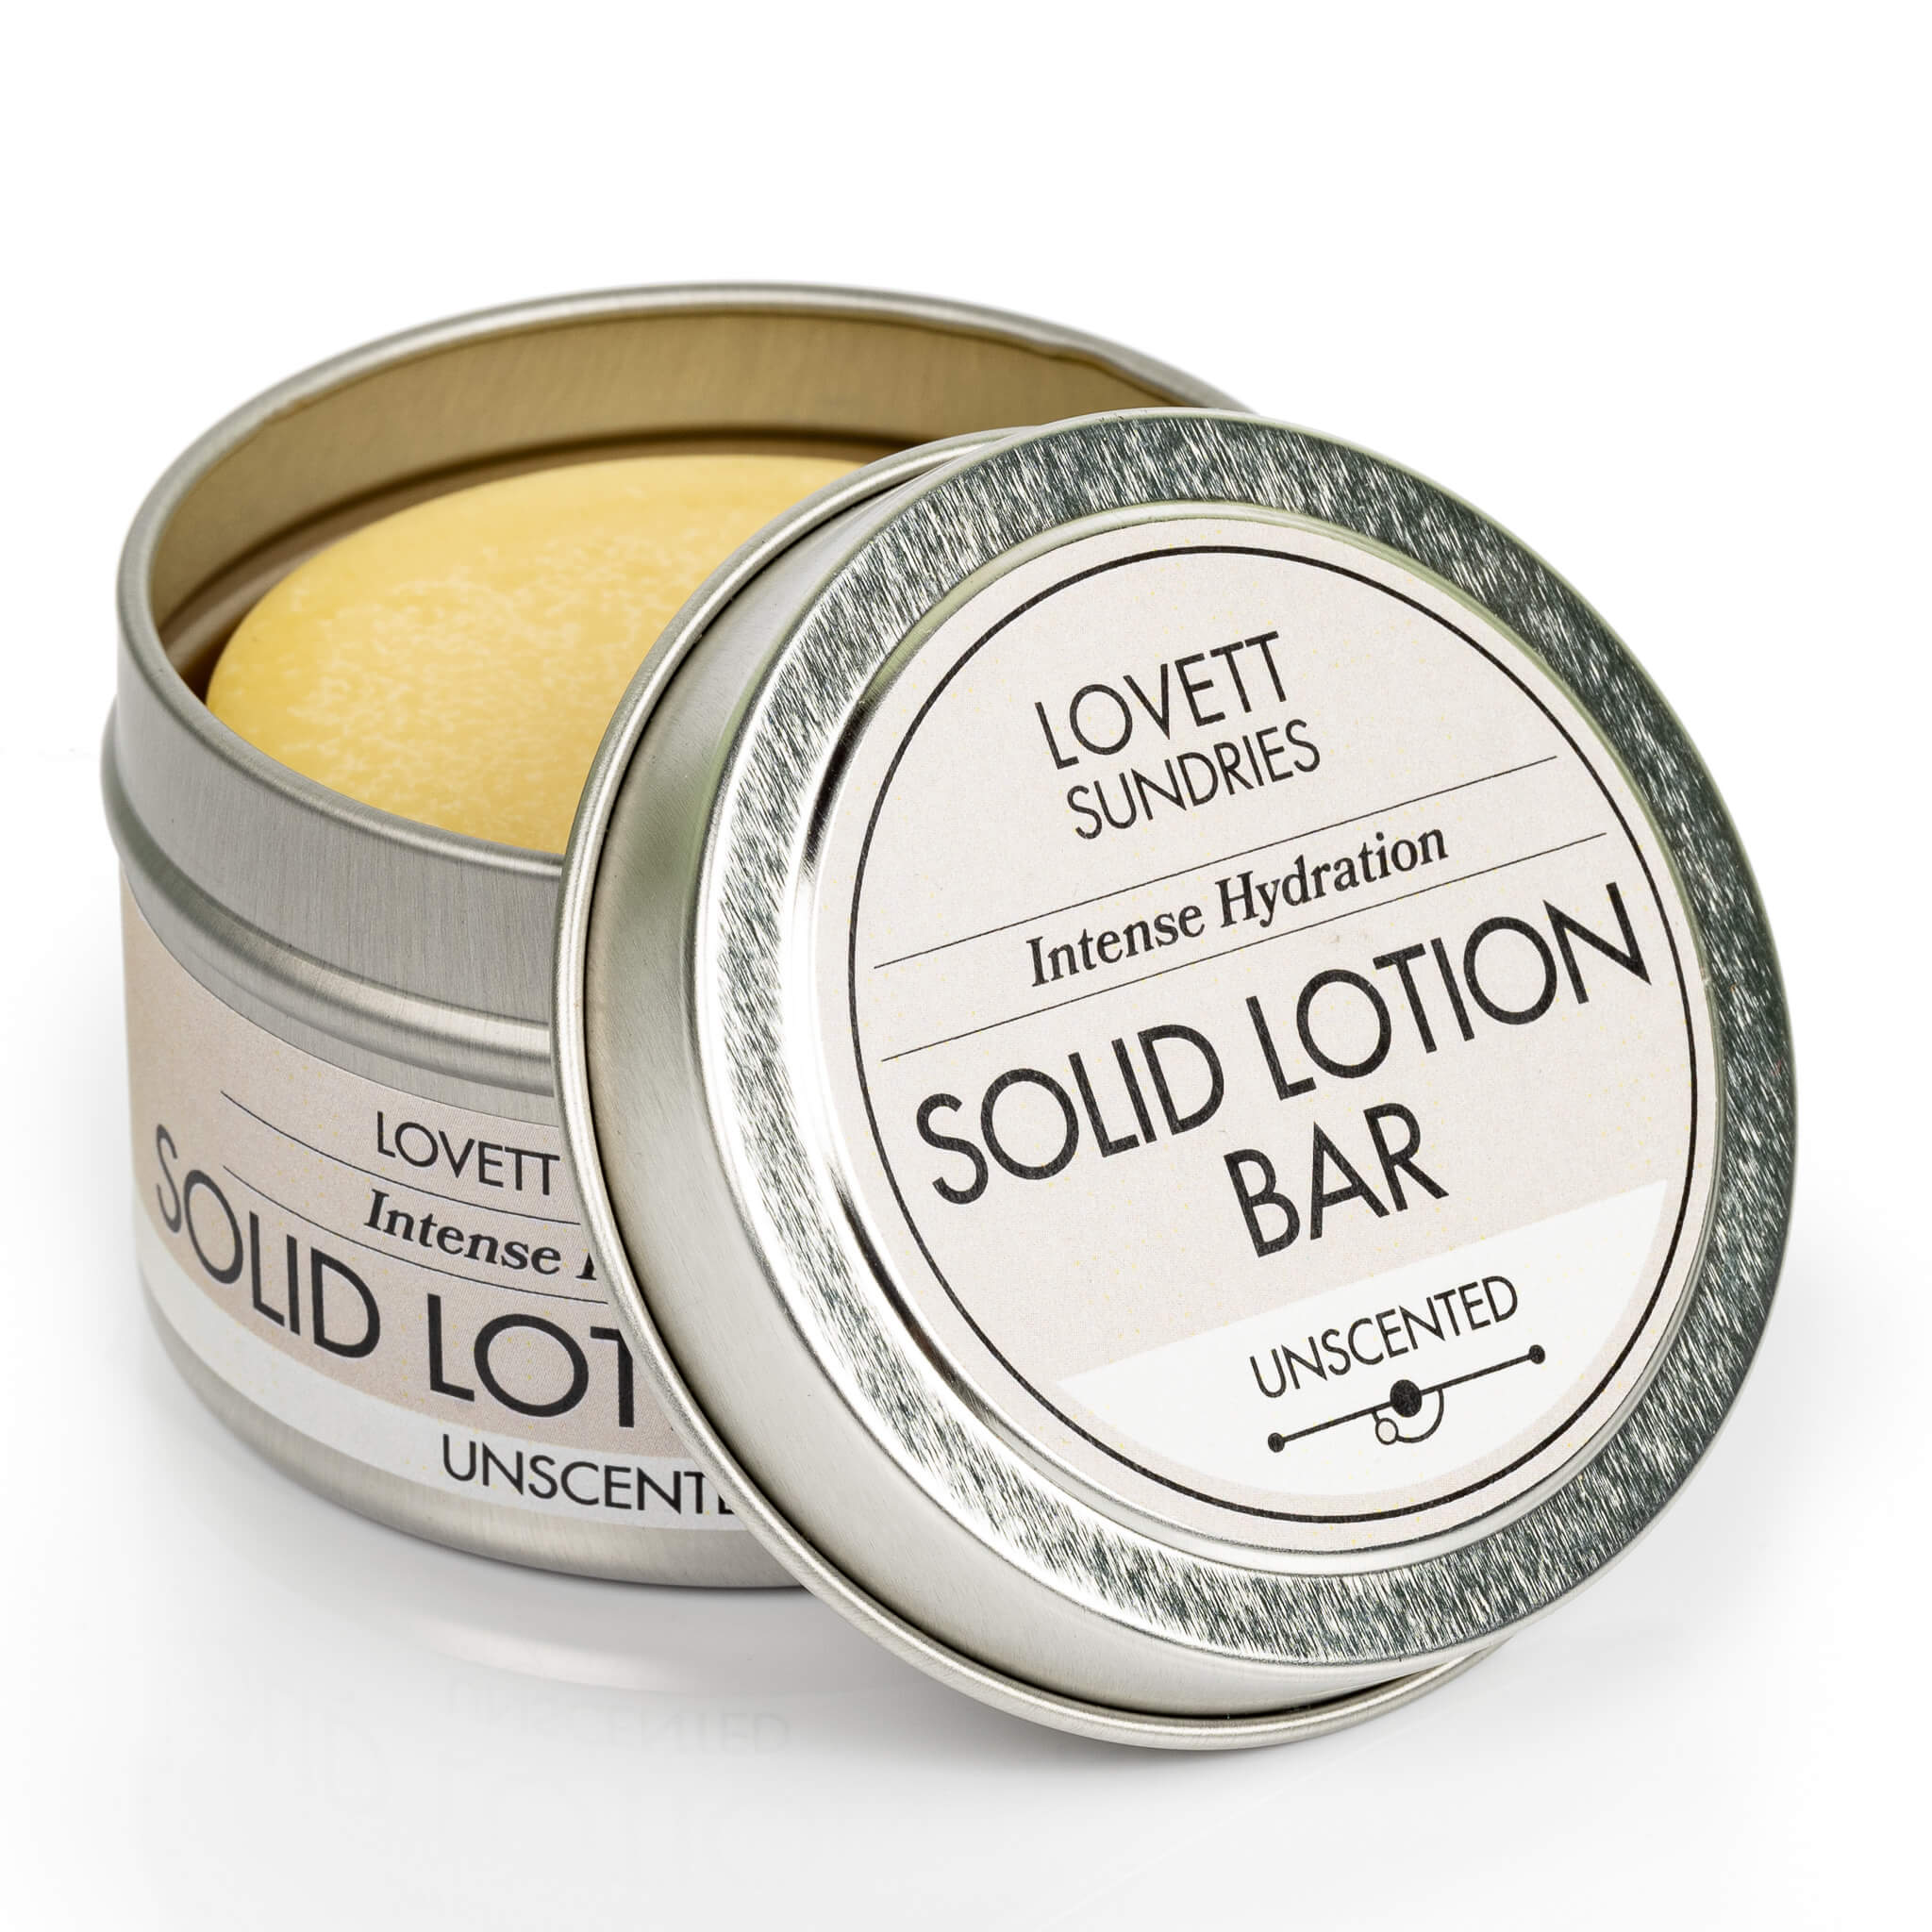 All natural intensly hydrating solid lotion bar in a recyclable metal tin. 